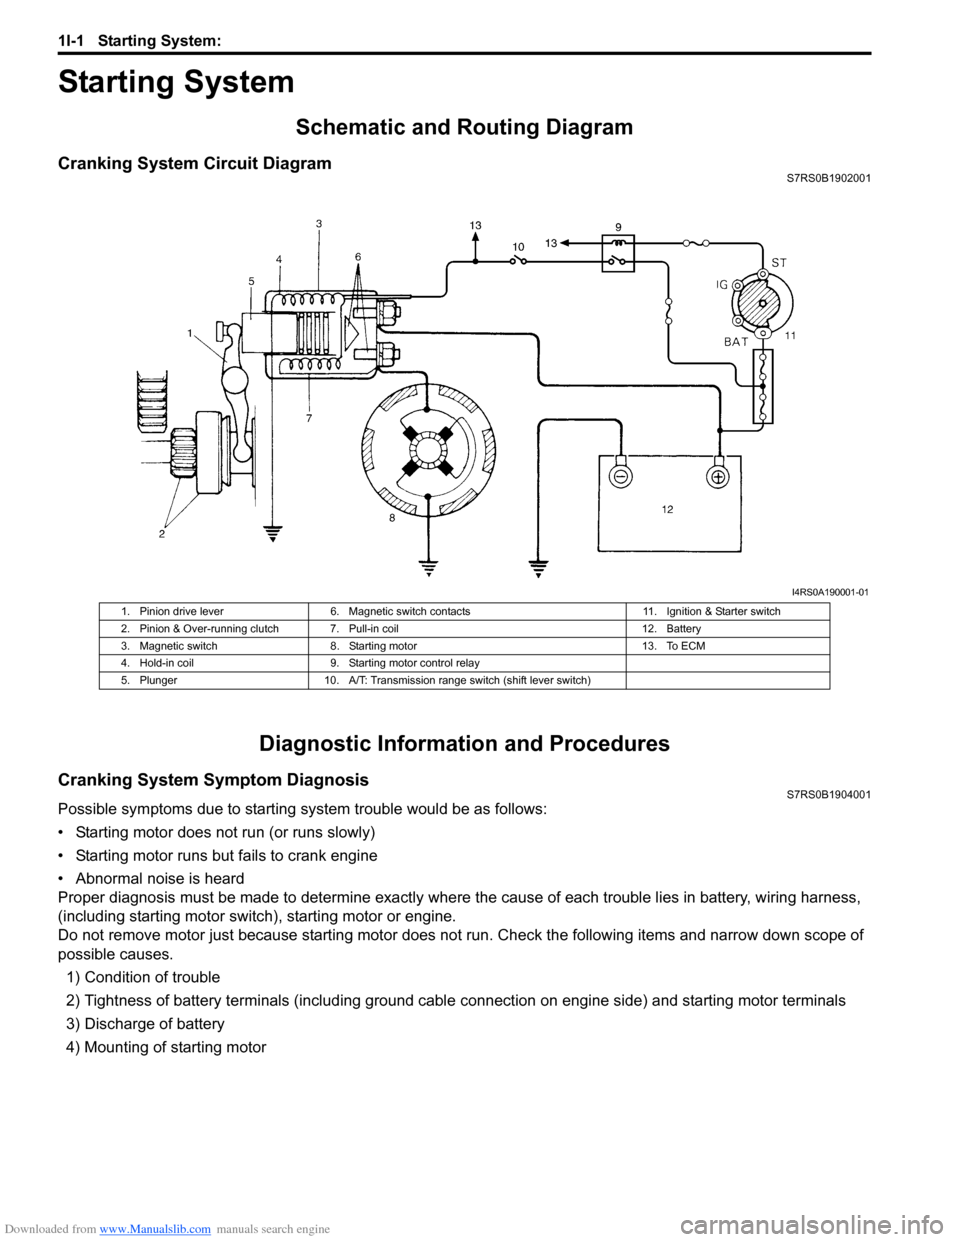 SUZUKI SWIFT 2005 2.G Service User Guide Downloaded from www.Manualslib.com manuals search engine 1I-1 Starting System: 
Engine
Starting System
Schematic and Routing Diagram
Cranking System Circuit DiagramS7RS0B1902001
Diagnostic Information